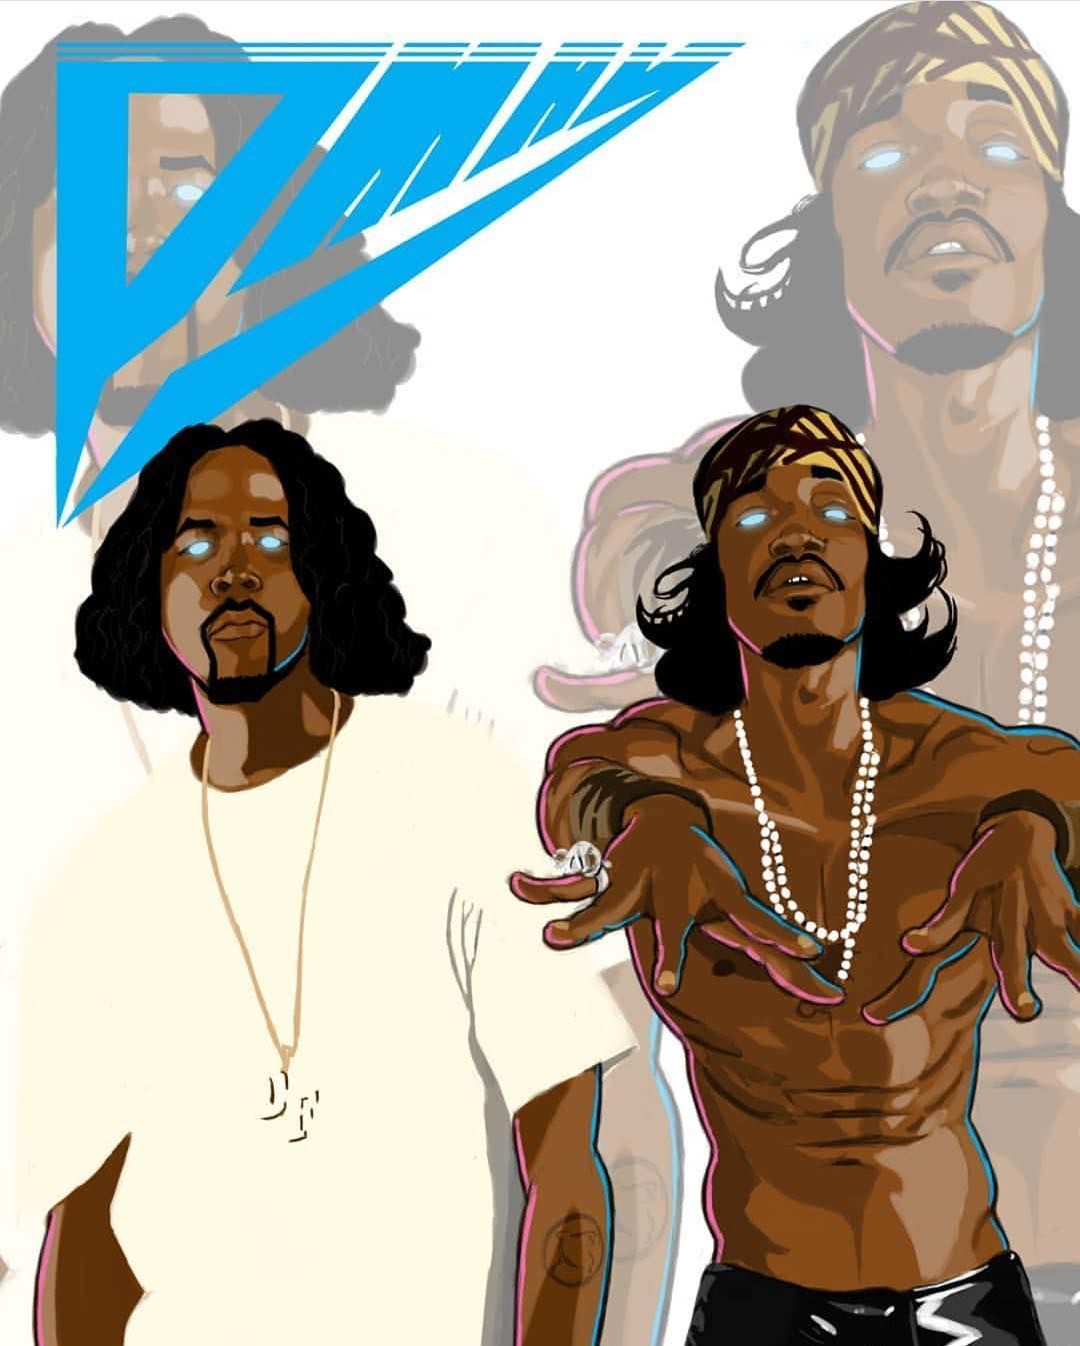 1080x1346 Music - OutKast Big Boi Andre 3000 - iPad iPhone HD Wallpaper Fre...